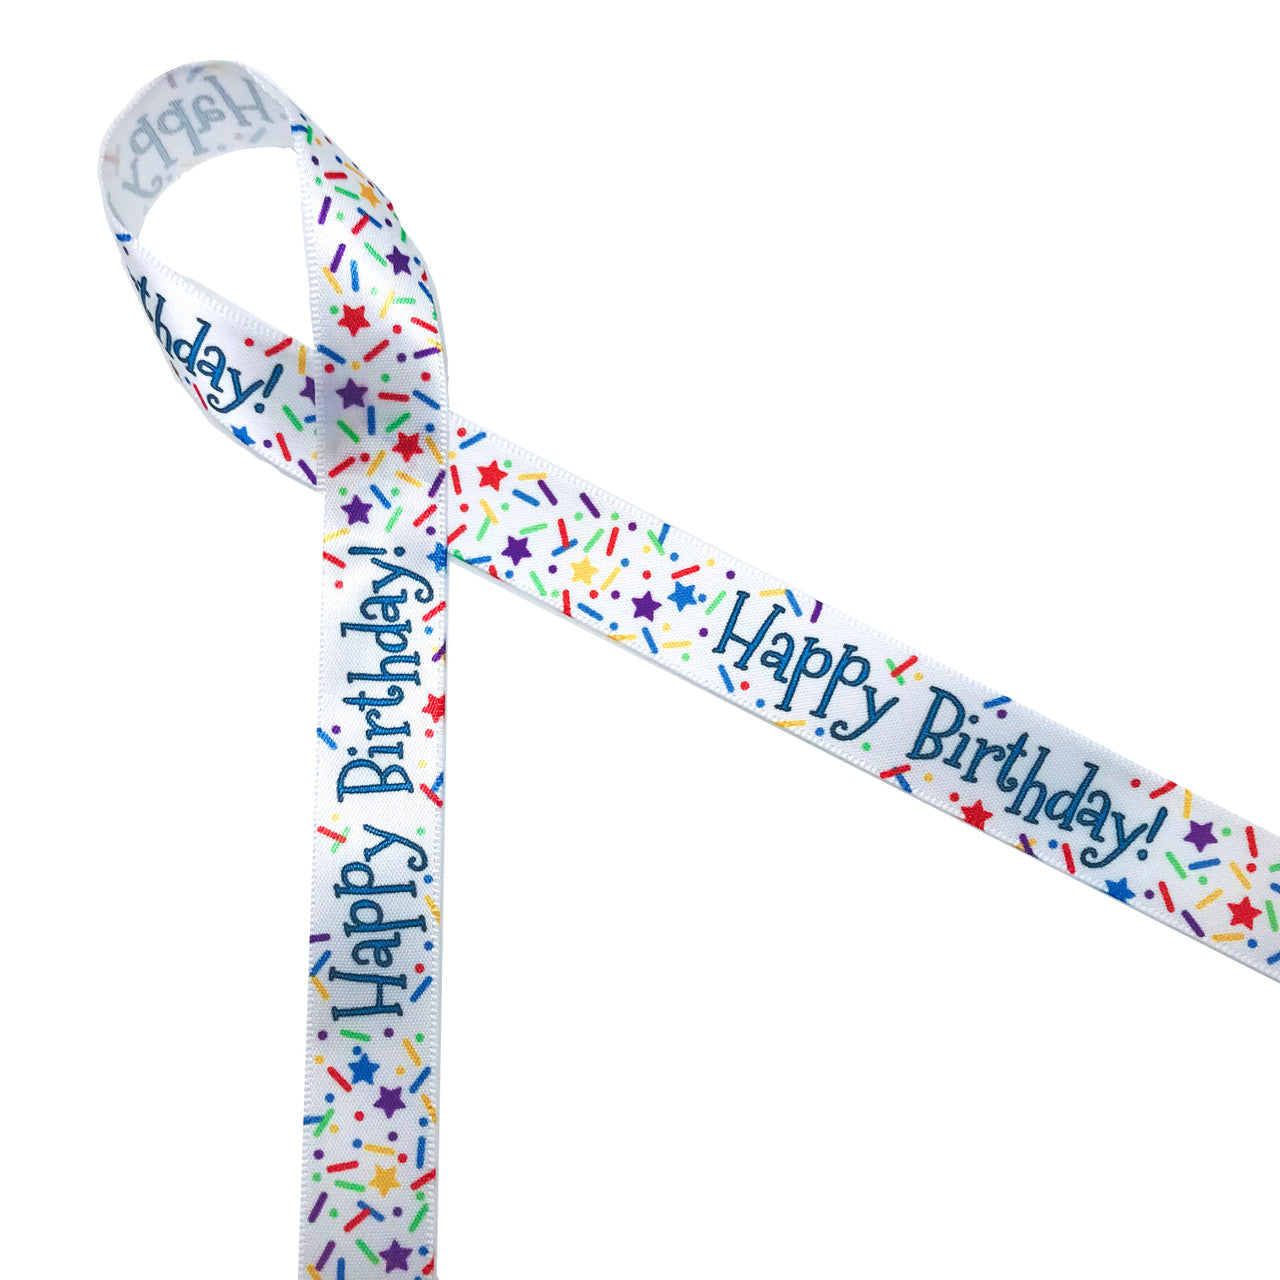 Happy Birthday on 5/8" White single face satin ribbon is embellished with sprinkles and stars for a complete birthday celebration.